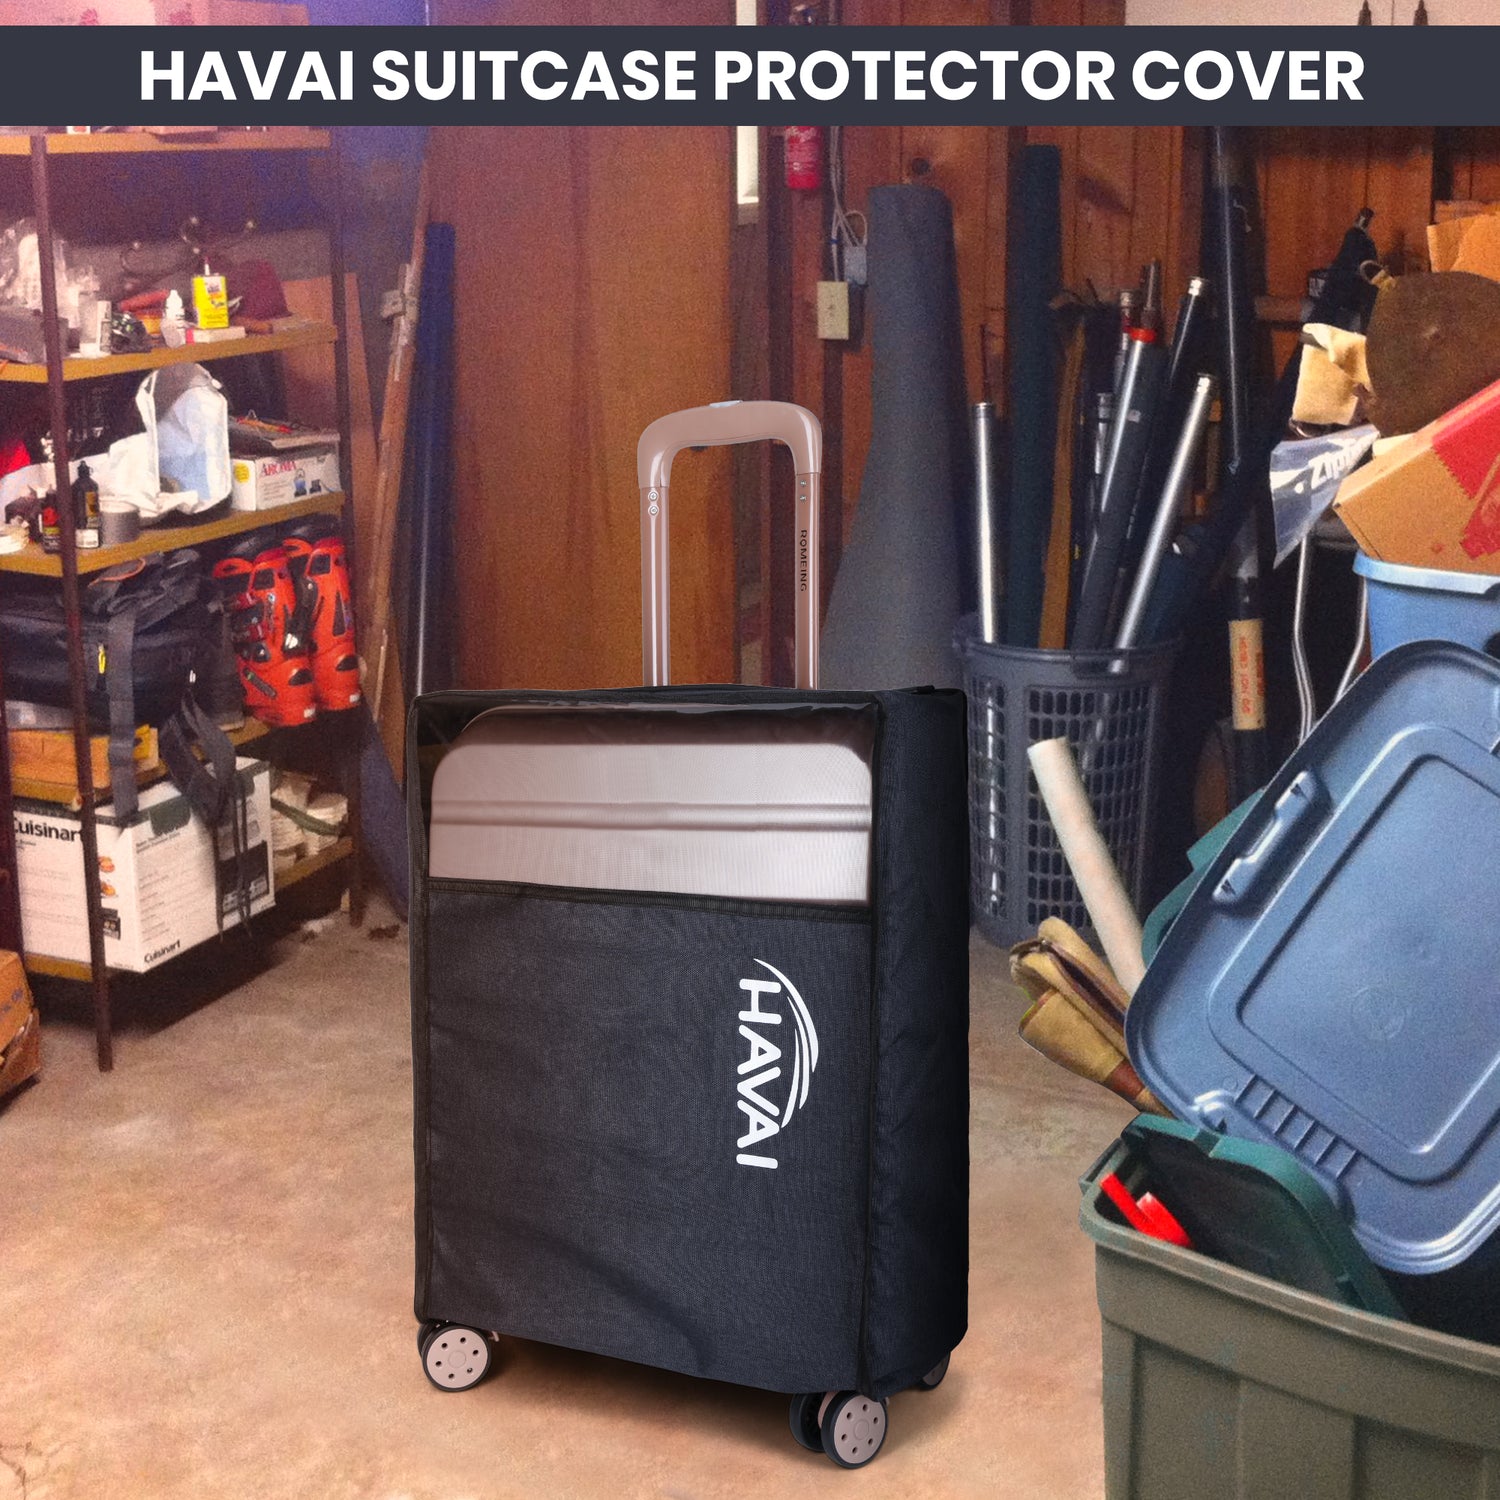 HAVAI Suitcase Storage Protector - Store your suitcase Safely (26 Inch), Navy Blue, Pack of 1